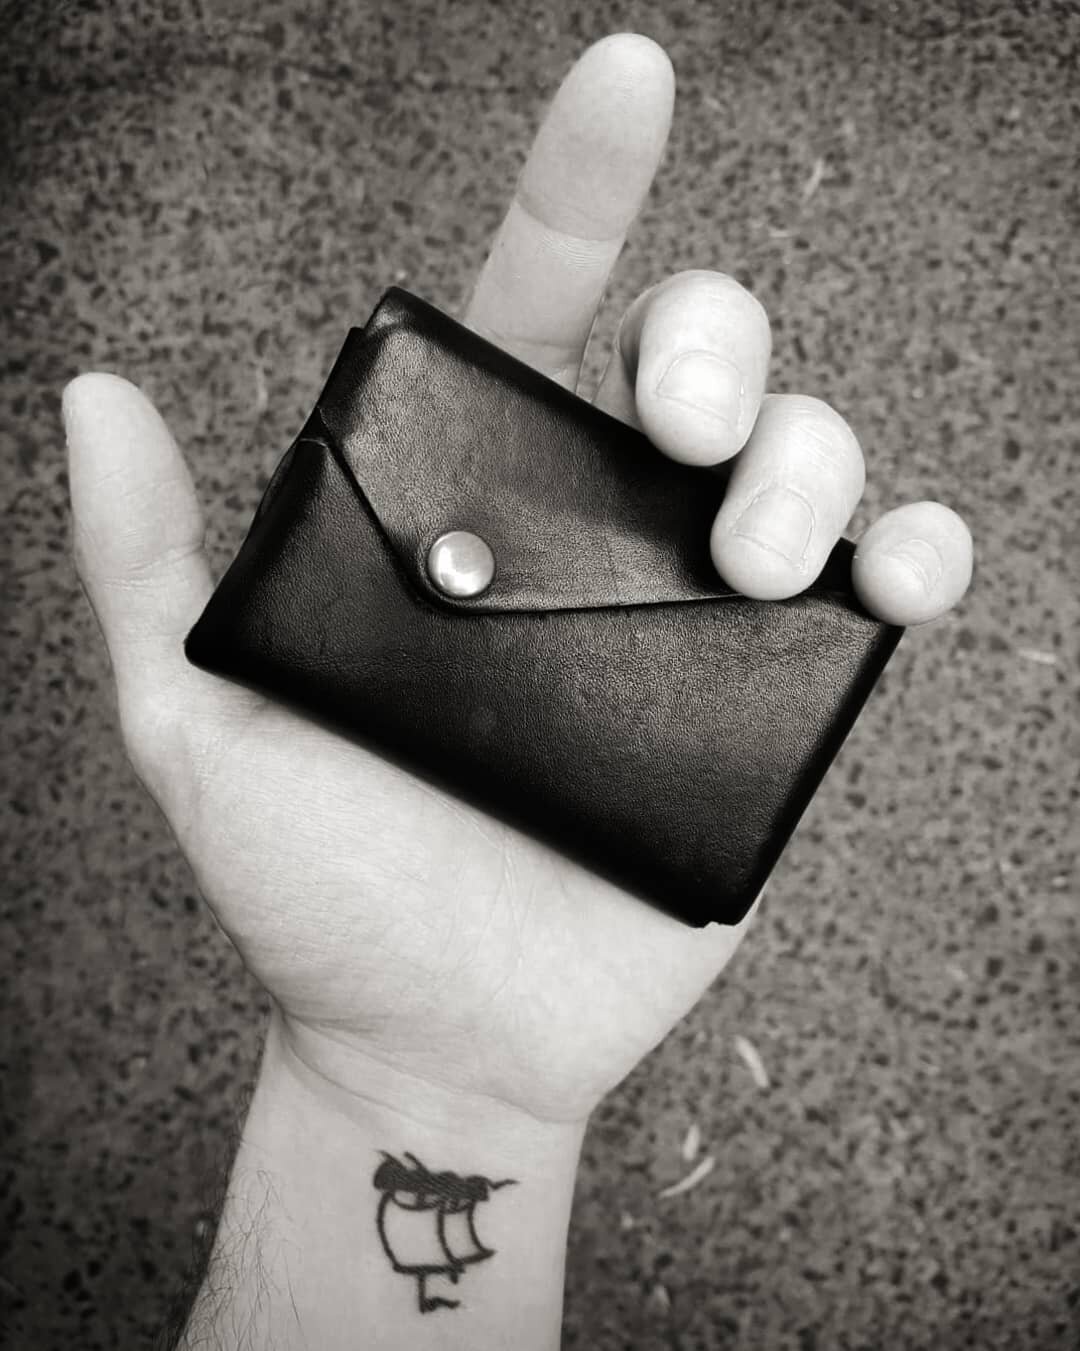 Black on!
@workshopaus on tonight, get in to learn how to make these and take one home.
.
.
.
#Sydney #Redfern #create #creatives #blackonblack #tattoo  #workshop #leather #leatherwork #diy #wallet #cardholder #pouch #unisex